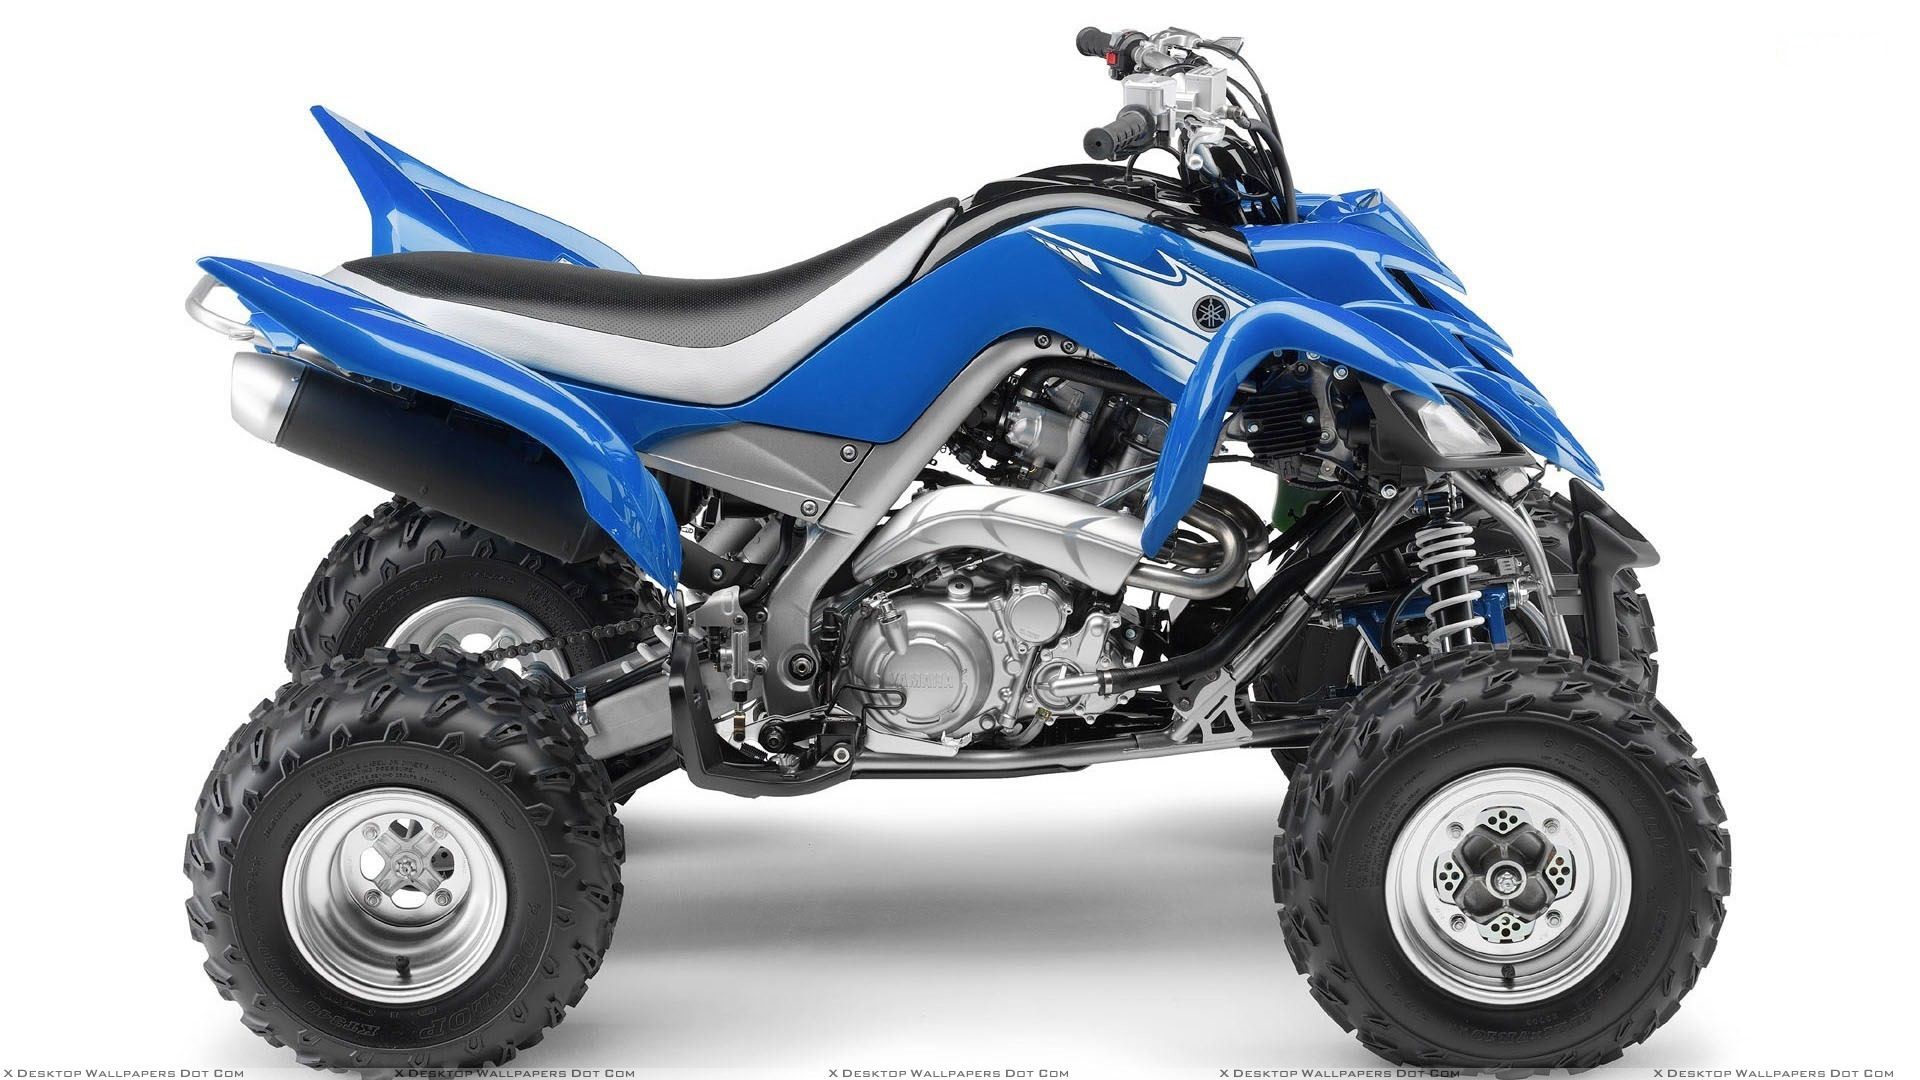 1920x1080 You are viewing wallpaper titled "Yamaha Raptor ...